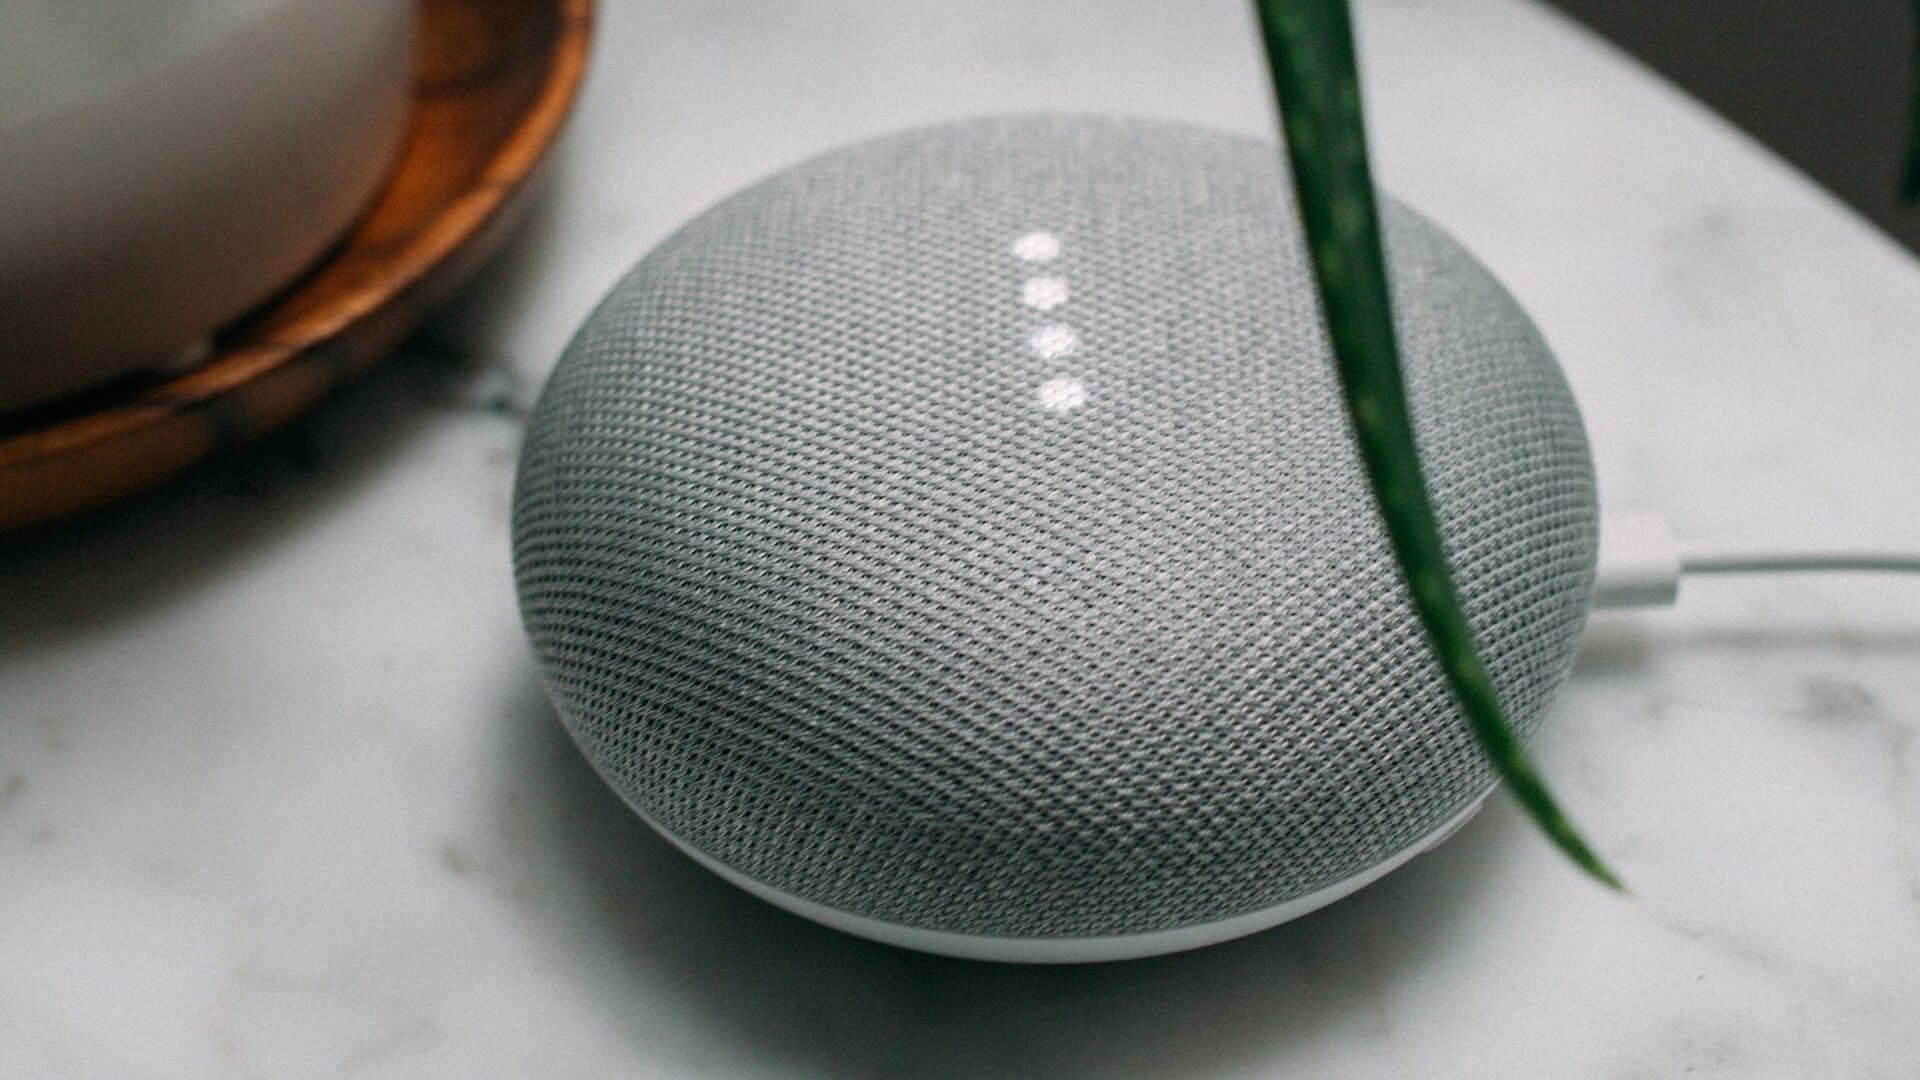 Mastering Google Assistant: Voice Command Examples